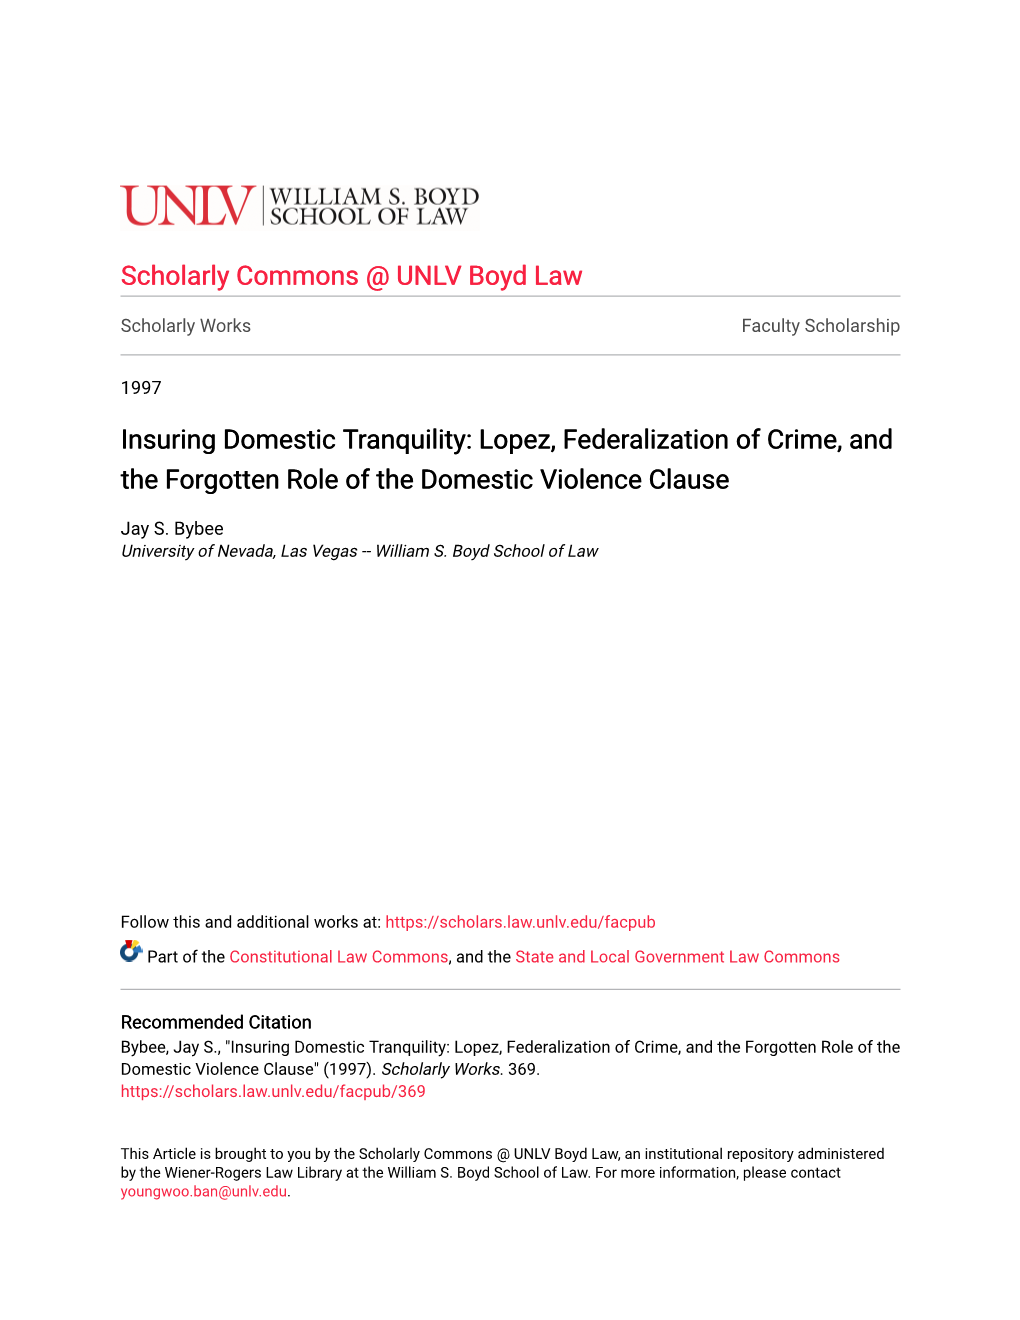 Insuring Domestic Tranquility: Lopez, Federalization of Crime, and the Forgotten Role of the Domestic Violence Clause